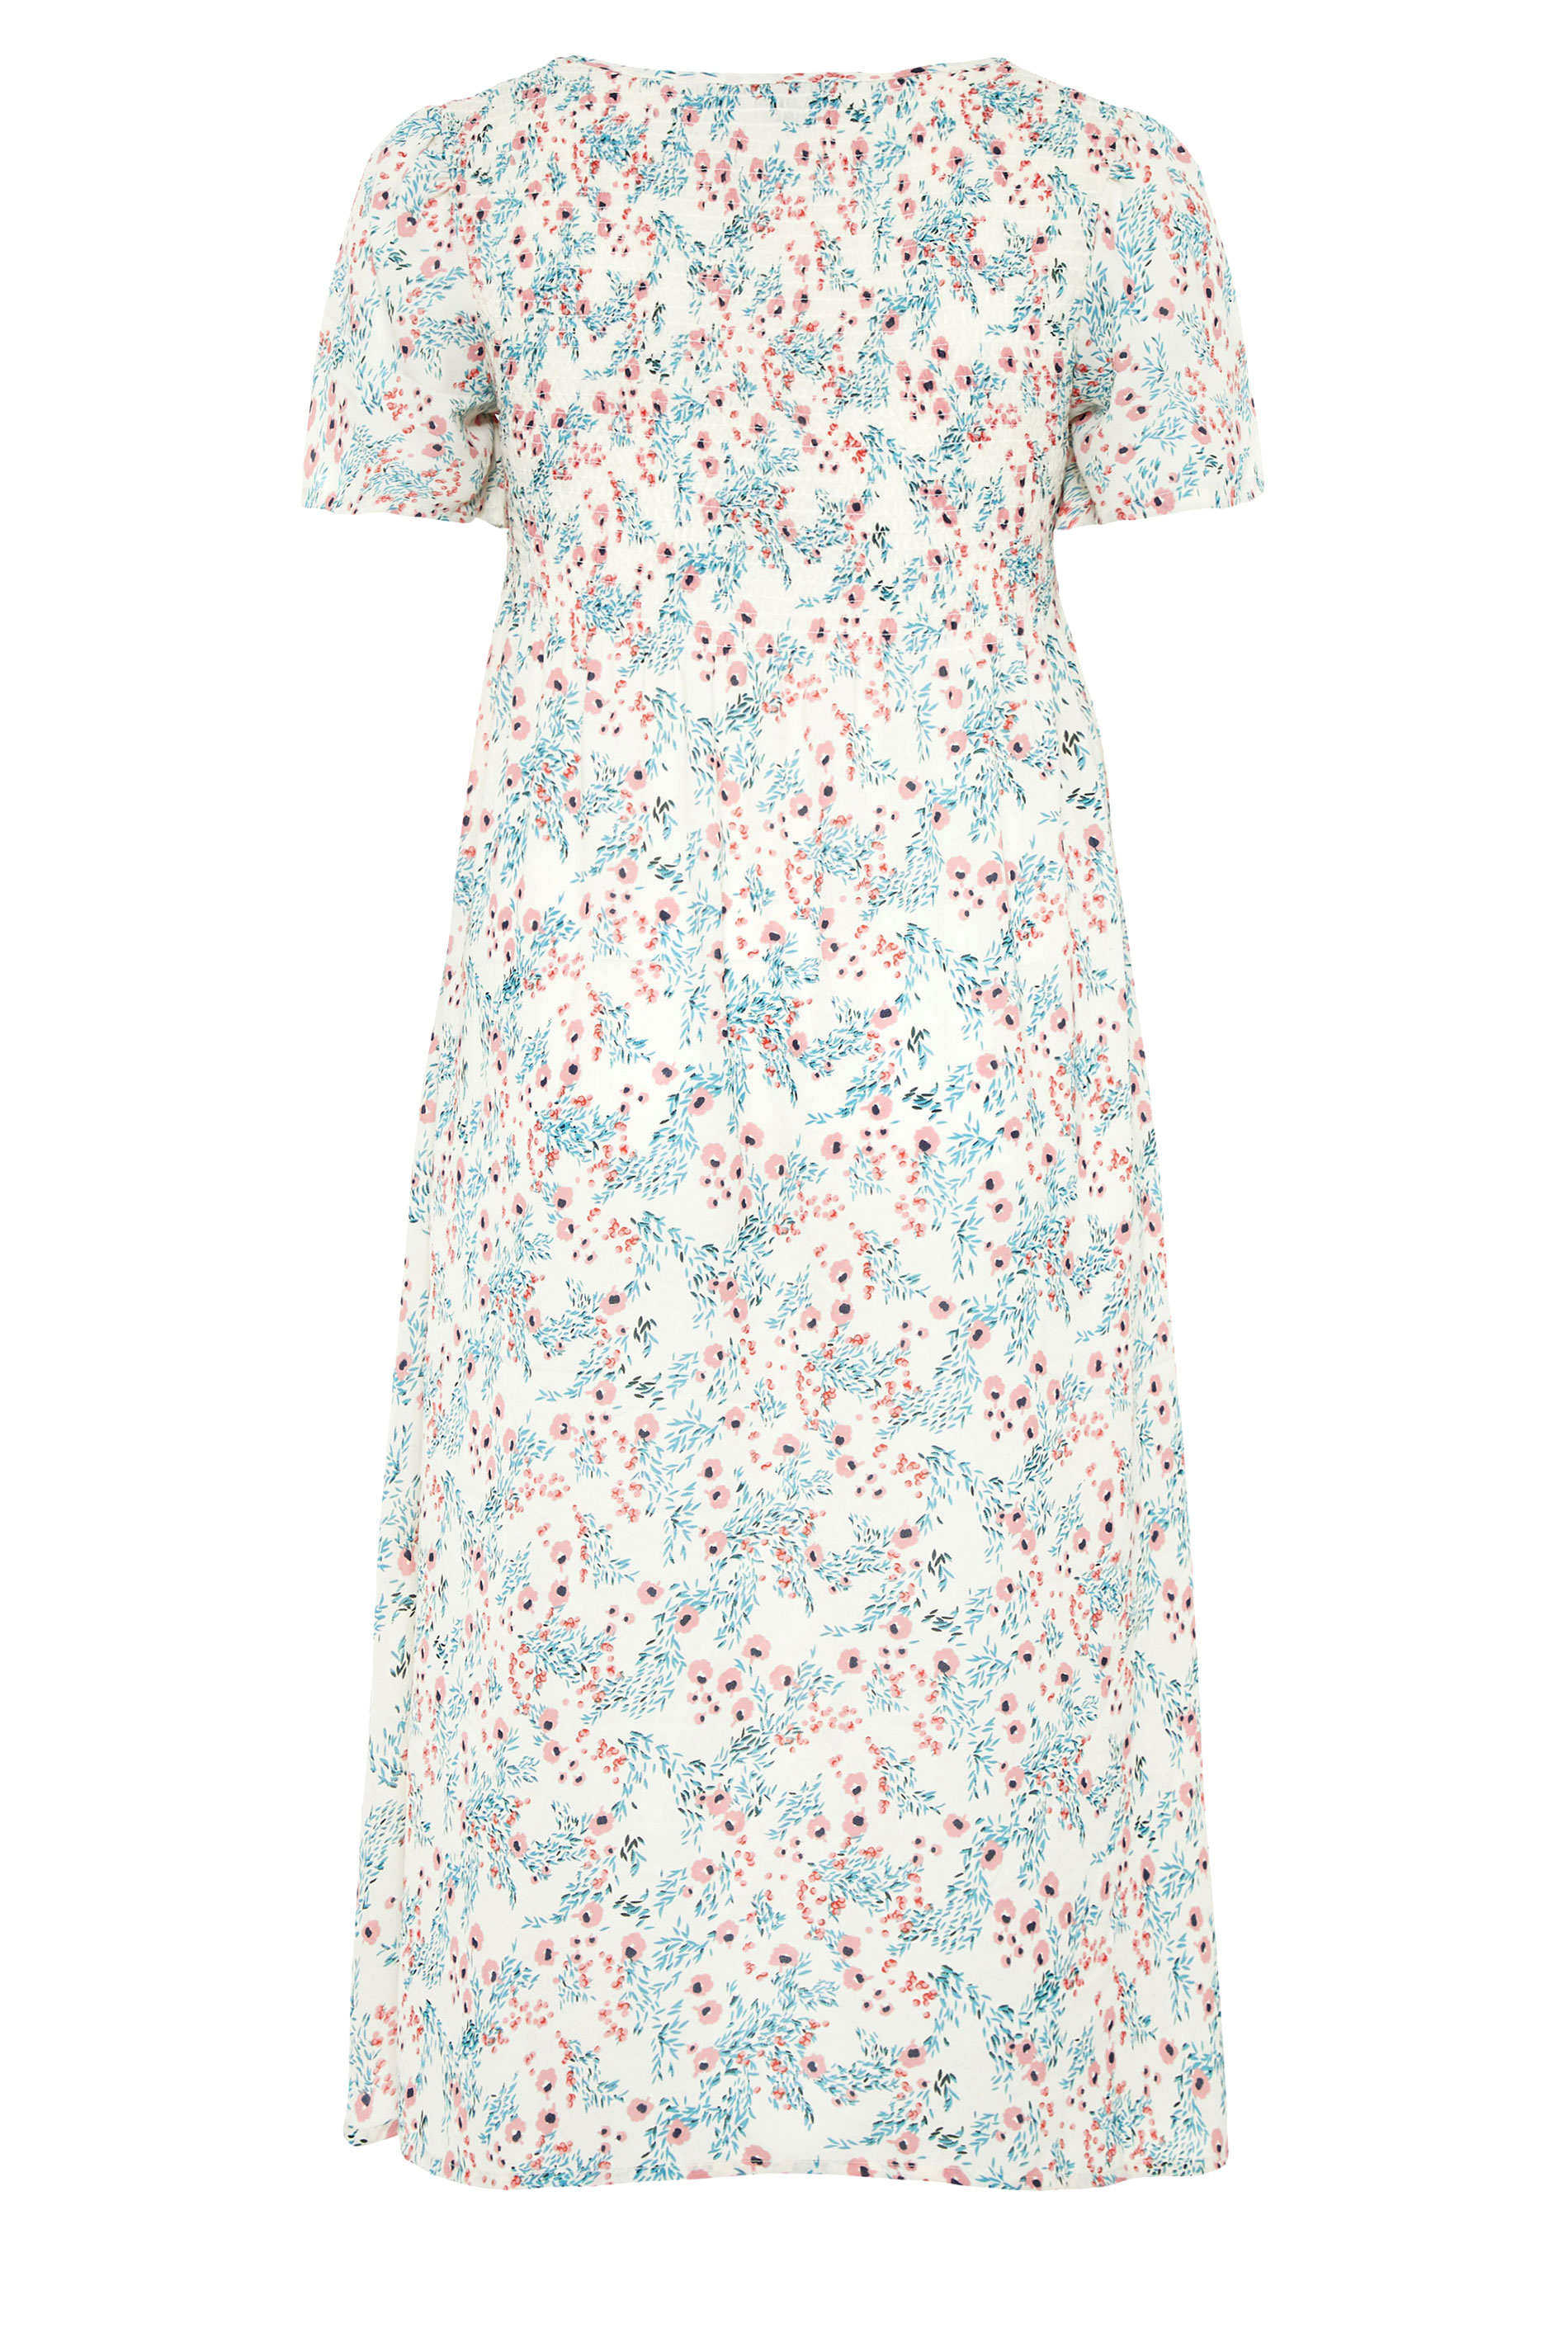 LIMITED COLLECTION White Floral Shirred Maxi Dress | Yours Clothing